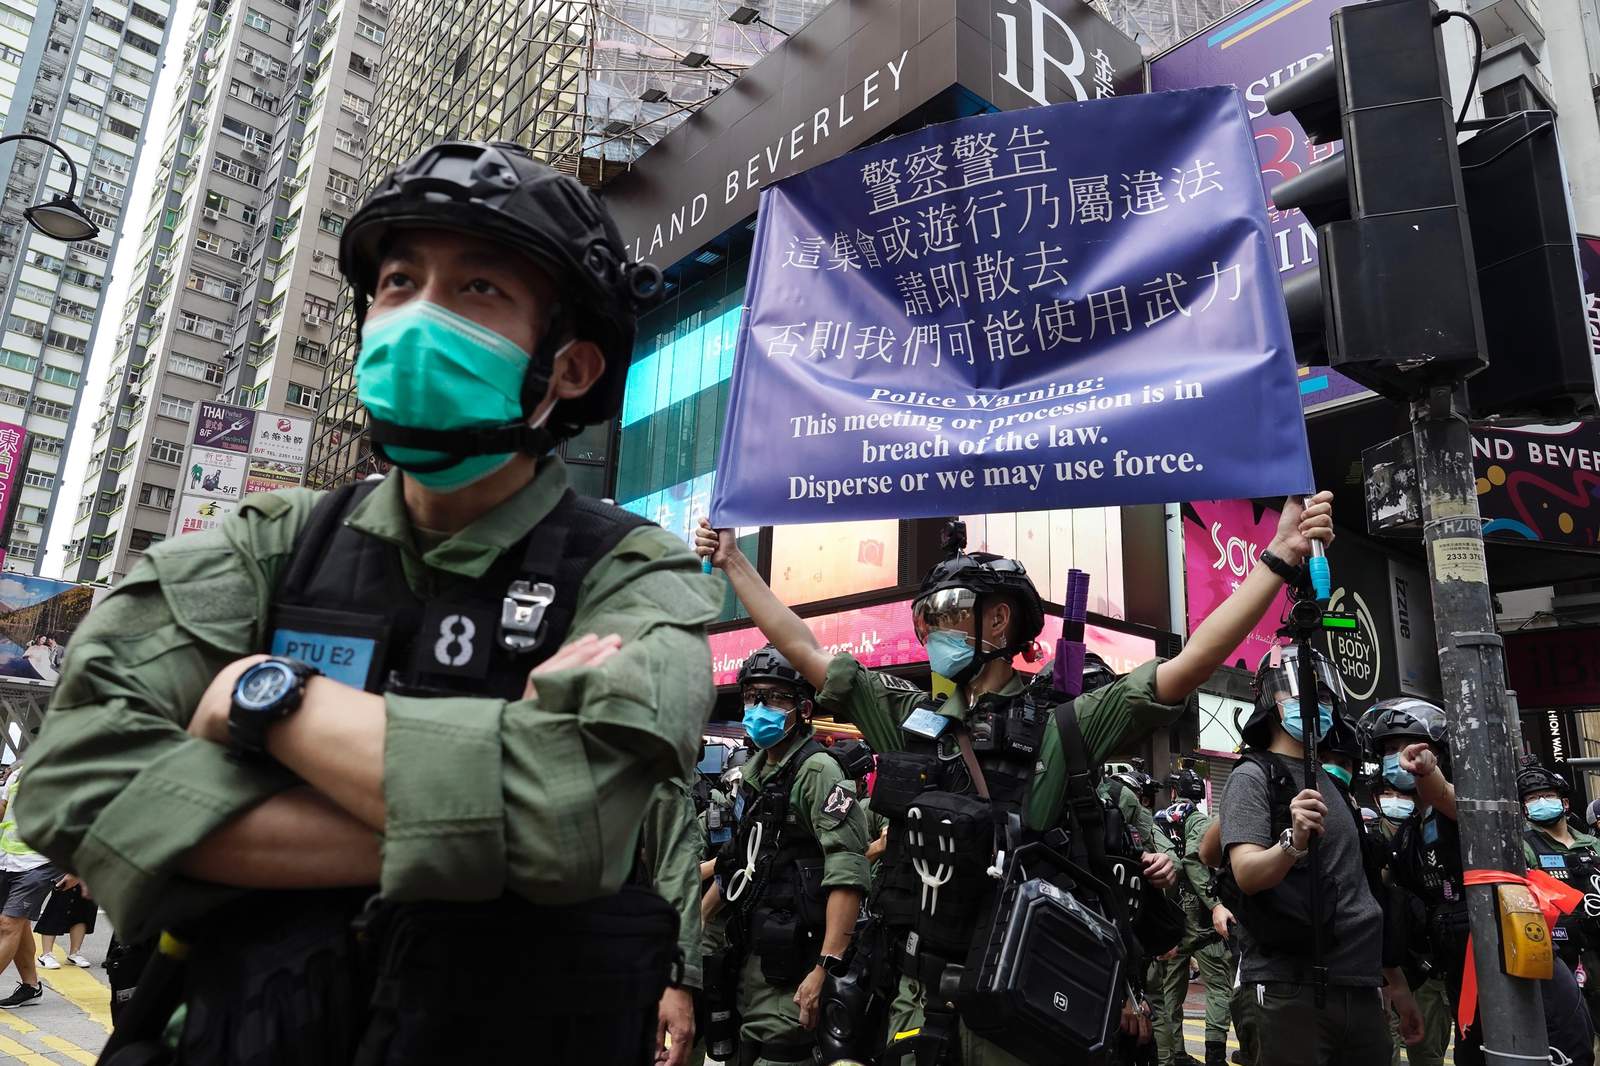 Hong Kong police arrest 86 for protesting on China holiday